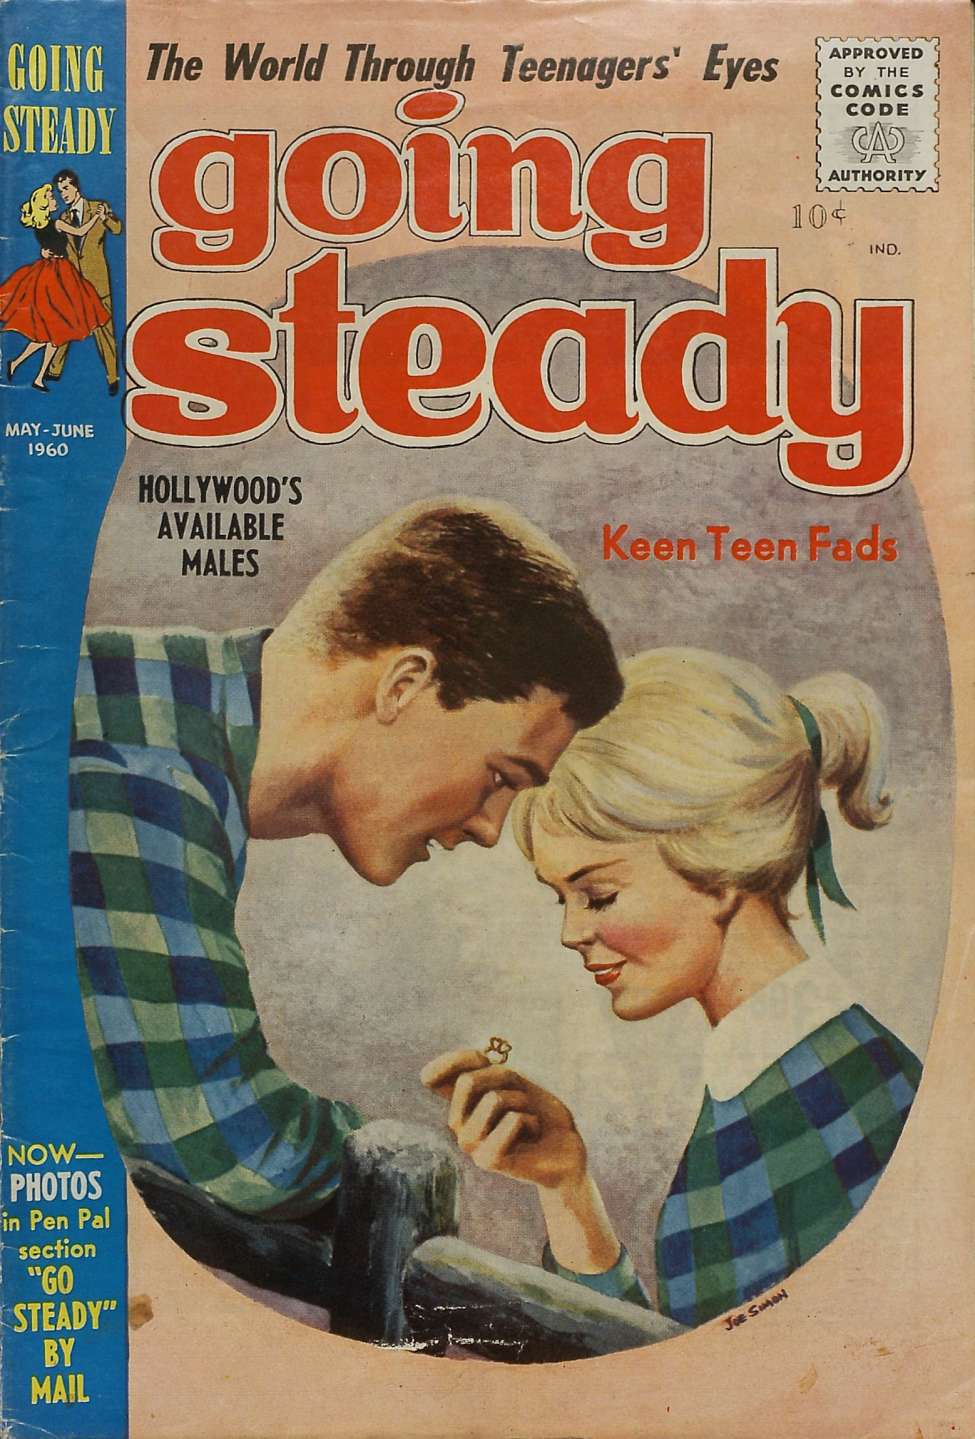 Book Cover For Going Steady v3 5